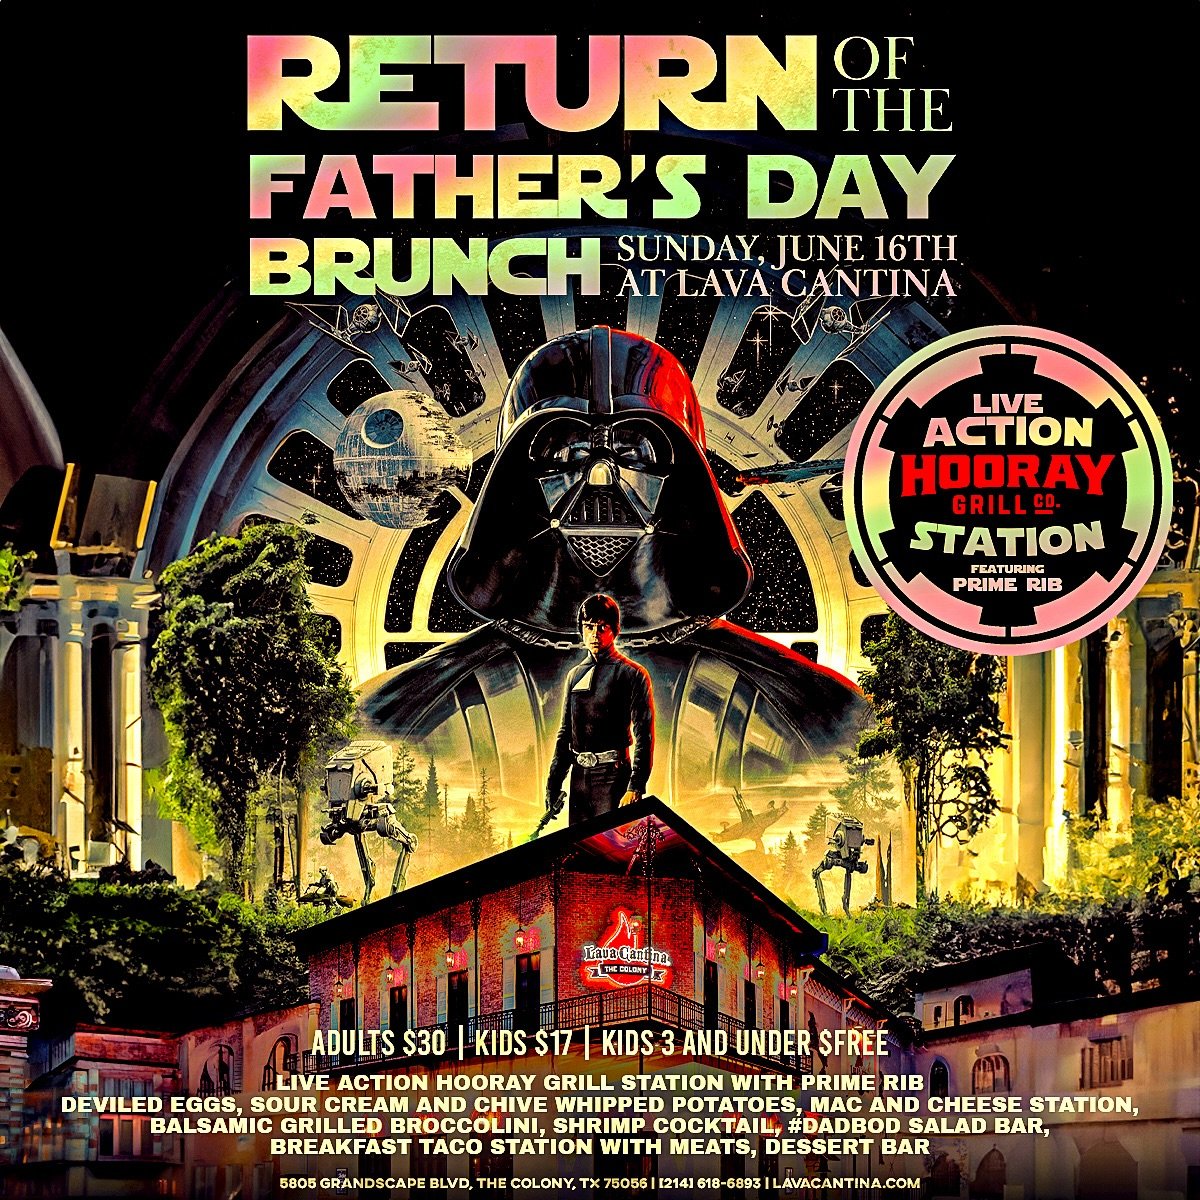 🚨 Bring the whole family out to celebrate a very special Father&rsquo;s Day brunch @lavacantinatc on Sunday, June 16th - featuring a LIVE ACTION PRIME RIB STATION with Hooray Grills, live DJ and MORE!!!! 🚨

💥💥💥💥💥

Live Action Hooray Grills Sta